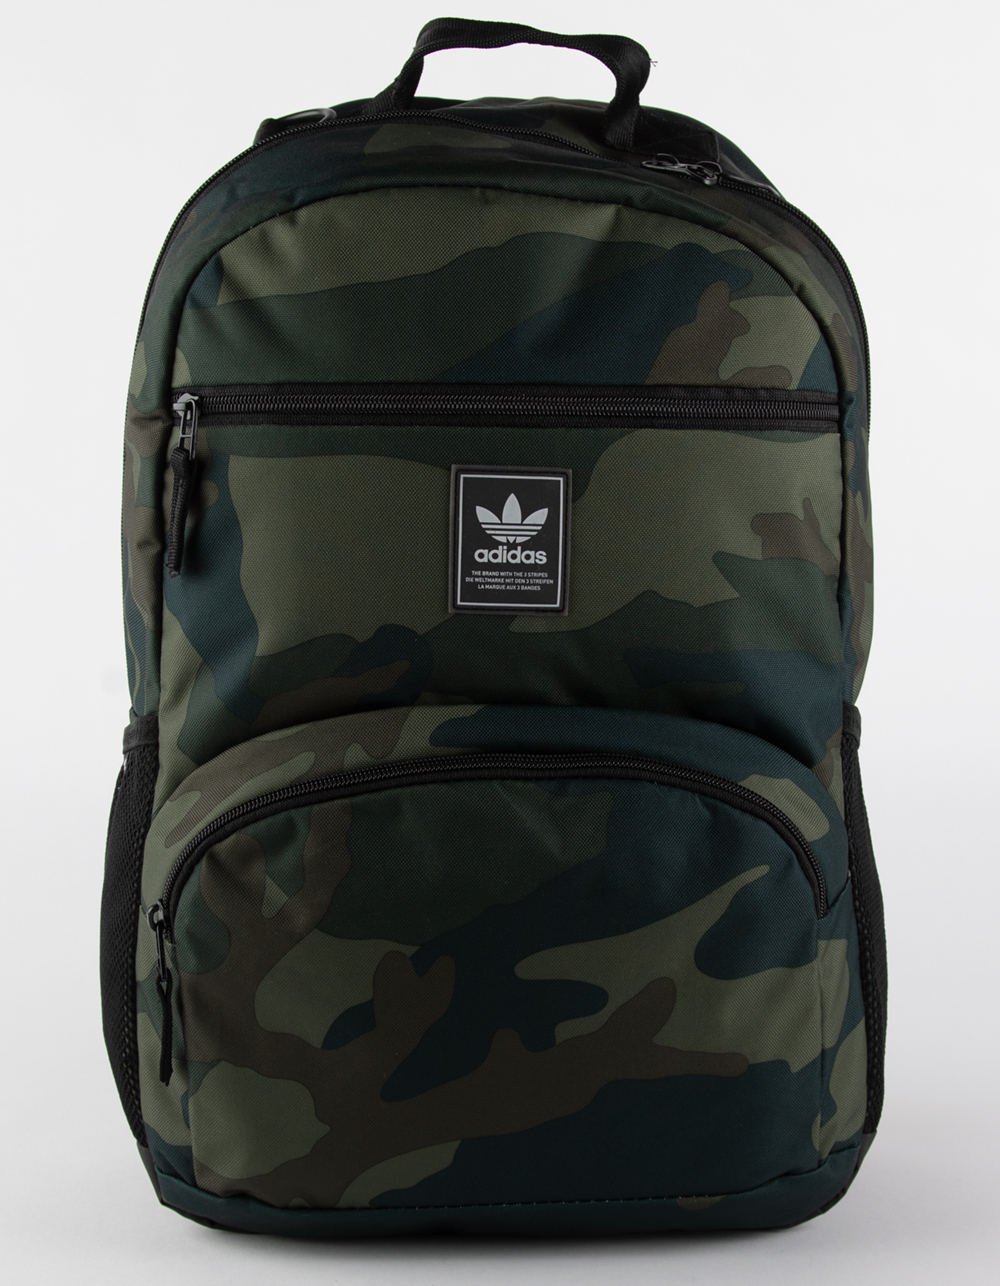 prediction lever landlord ADIDAS National 2.0 Backpack - CAMO | Tillys